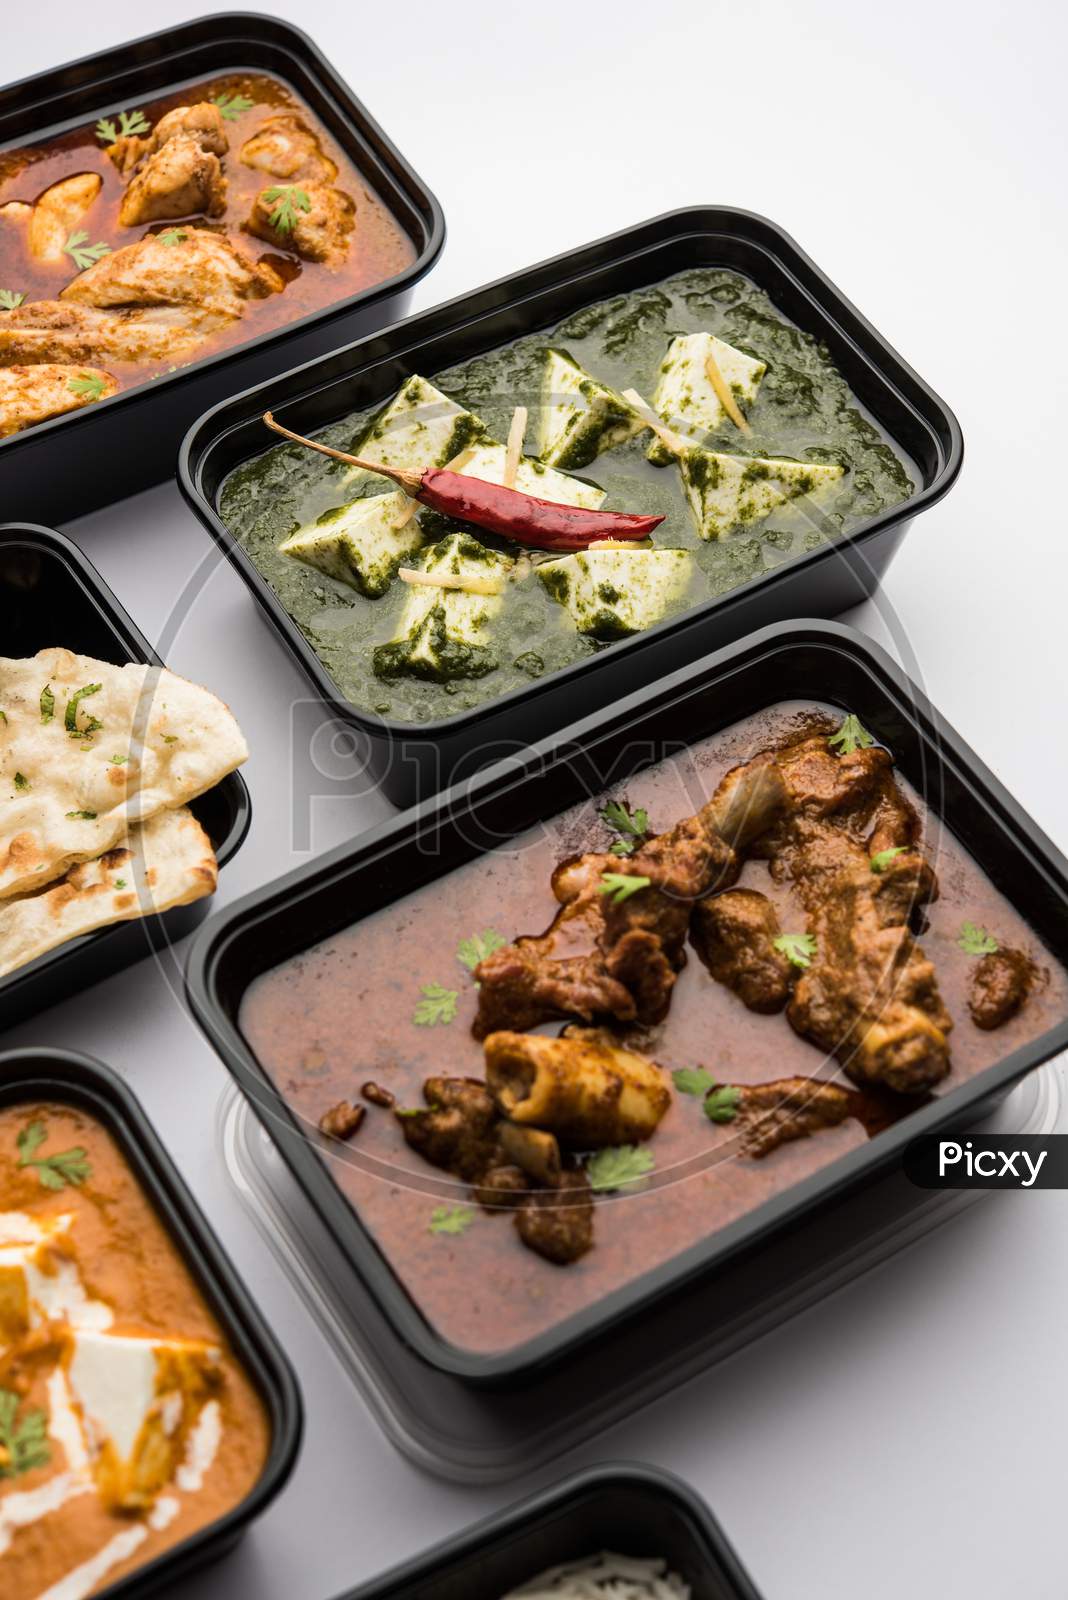 Indian Chicken & Mutton Curry With Paneer Butter Masala And Spinach Curry In Plastic Boxes For Home Delivery